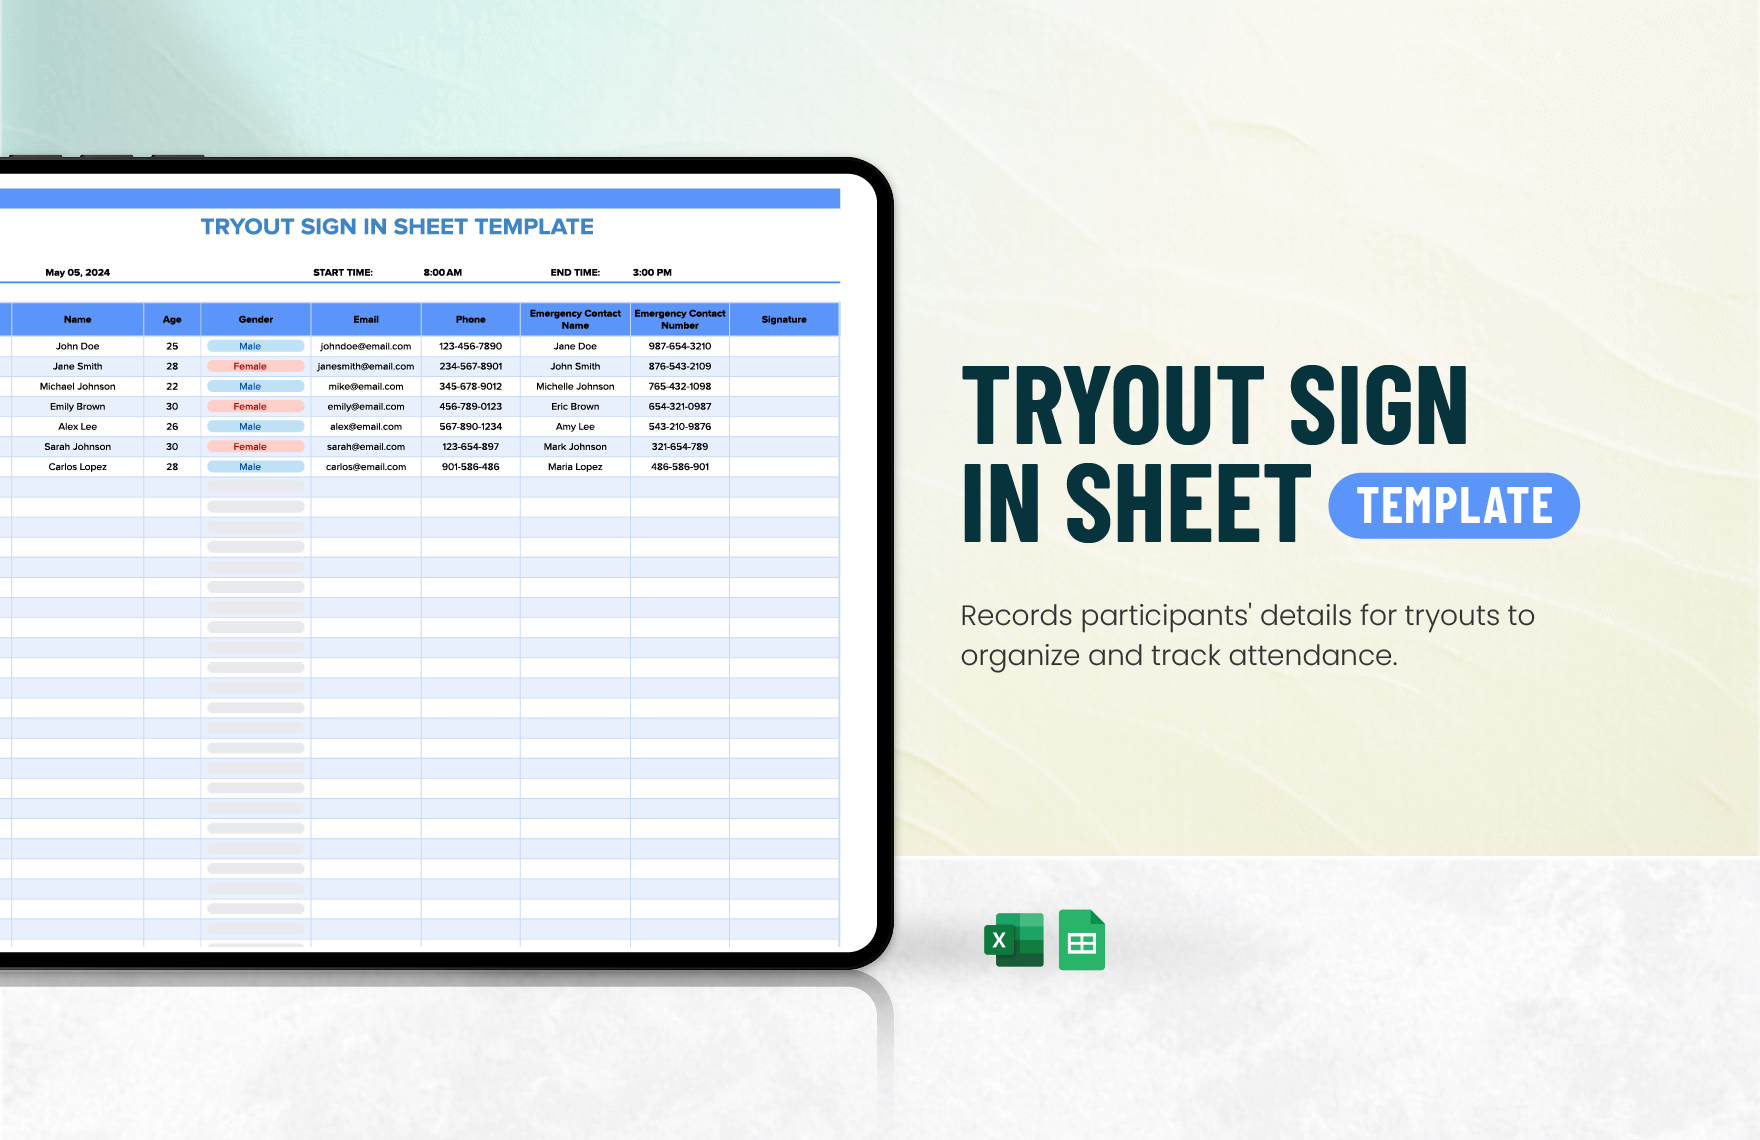 Free Tryout Sign in Sheet Template in Excel, Google Sheets